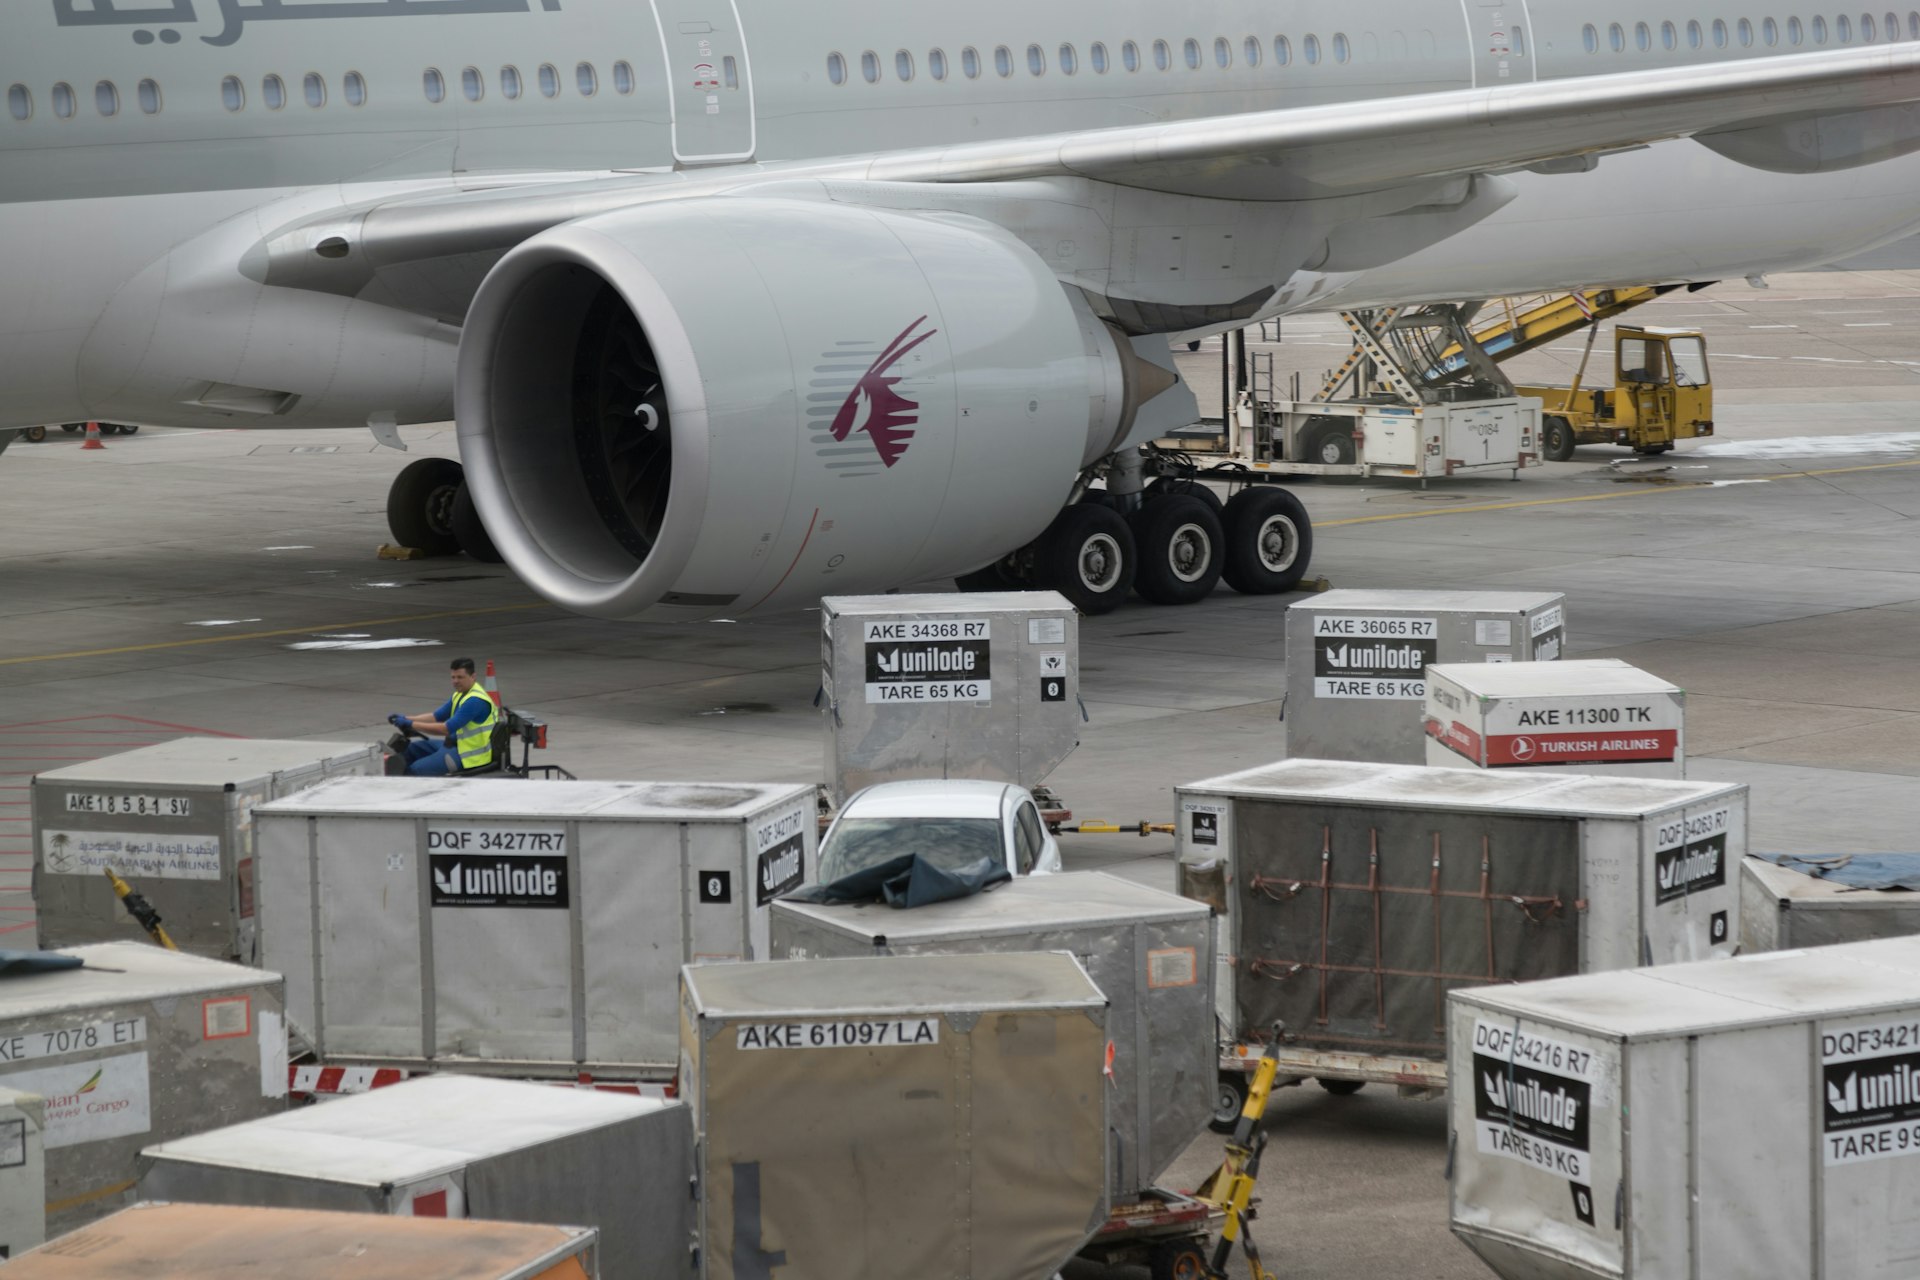 a large airplane is being loaded with luggage